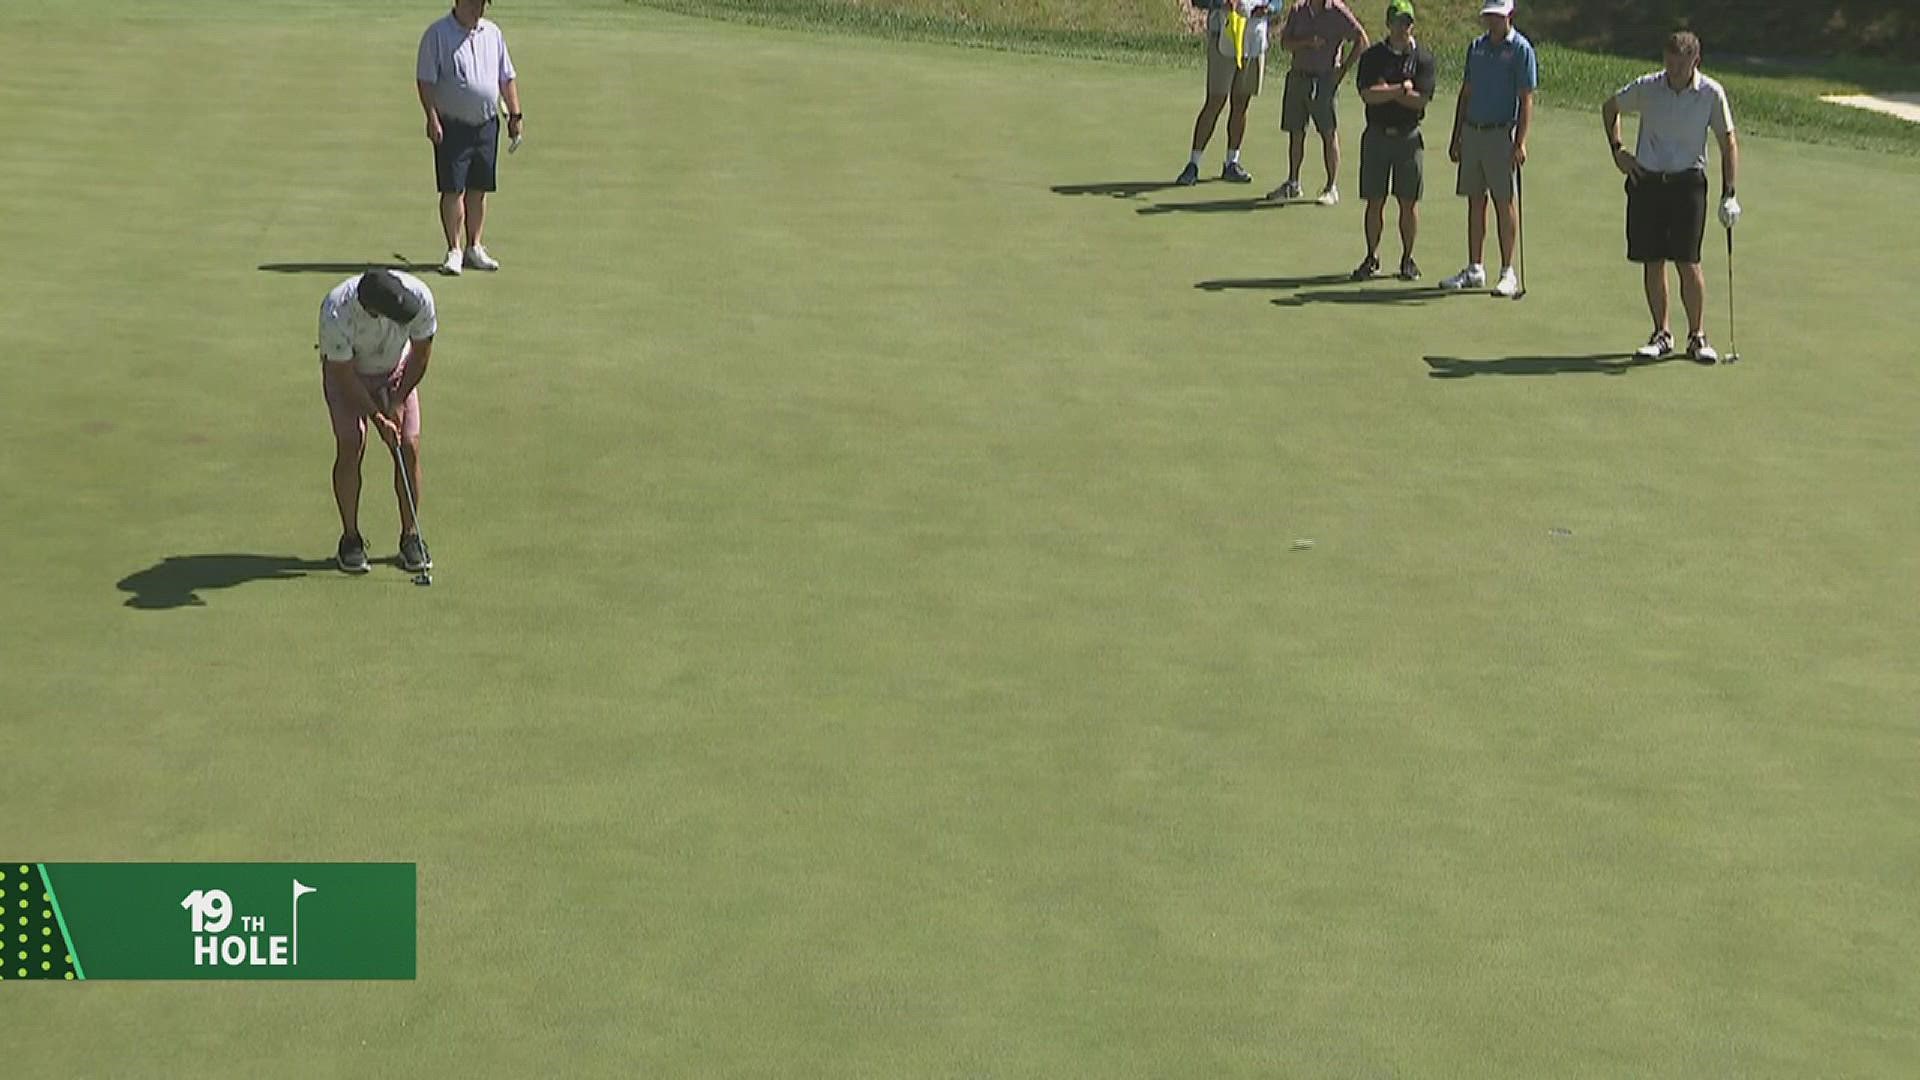 The first Putt of the Day award goes to Joe Schollaert from Ohio, who made a long shot for birdie on hole 16.